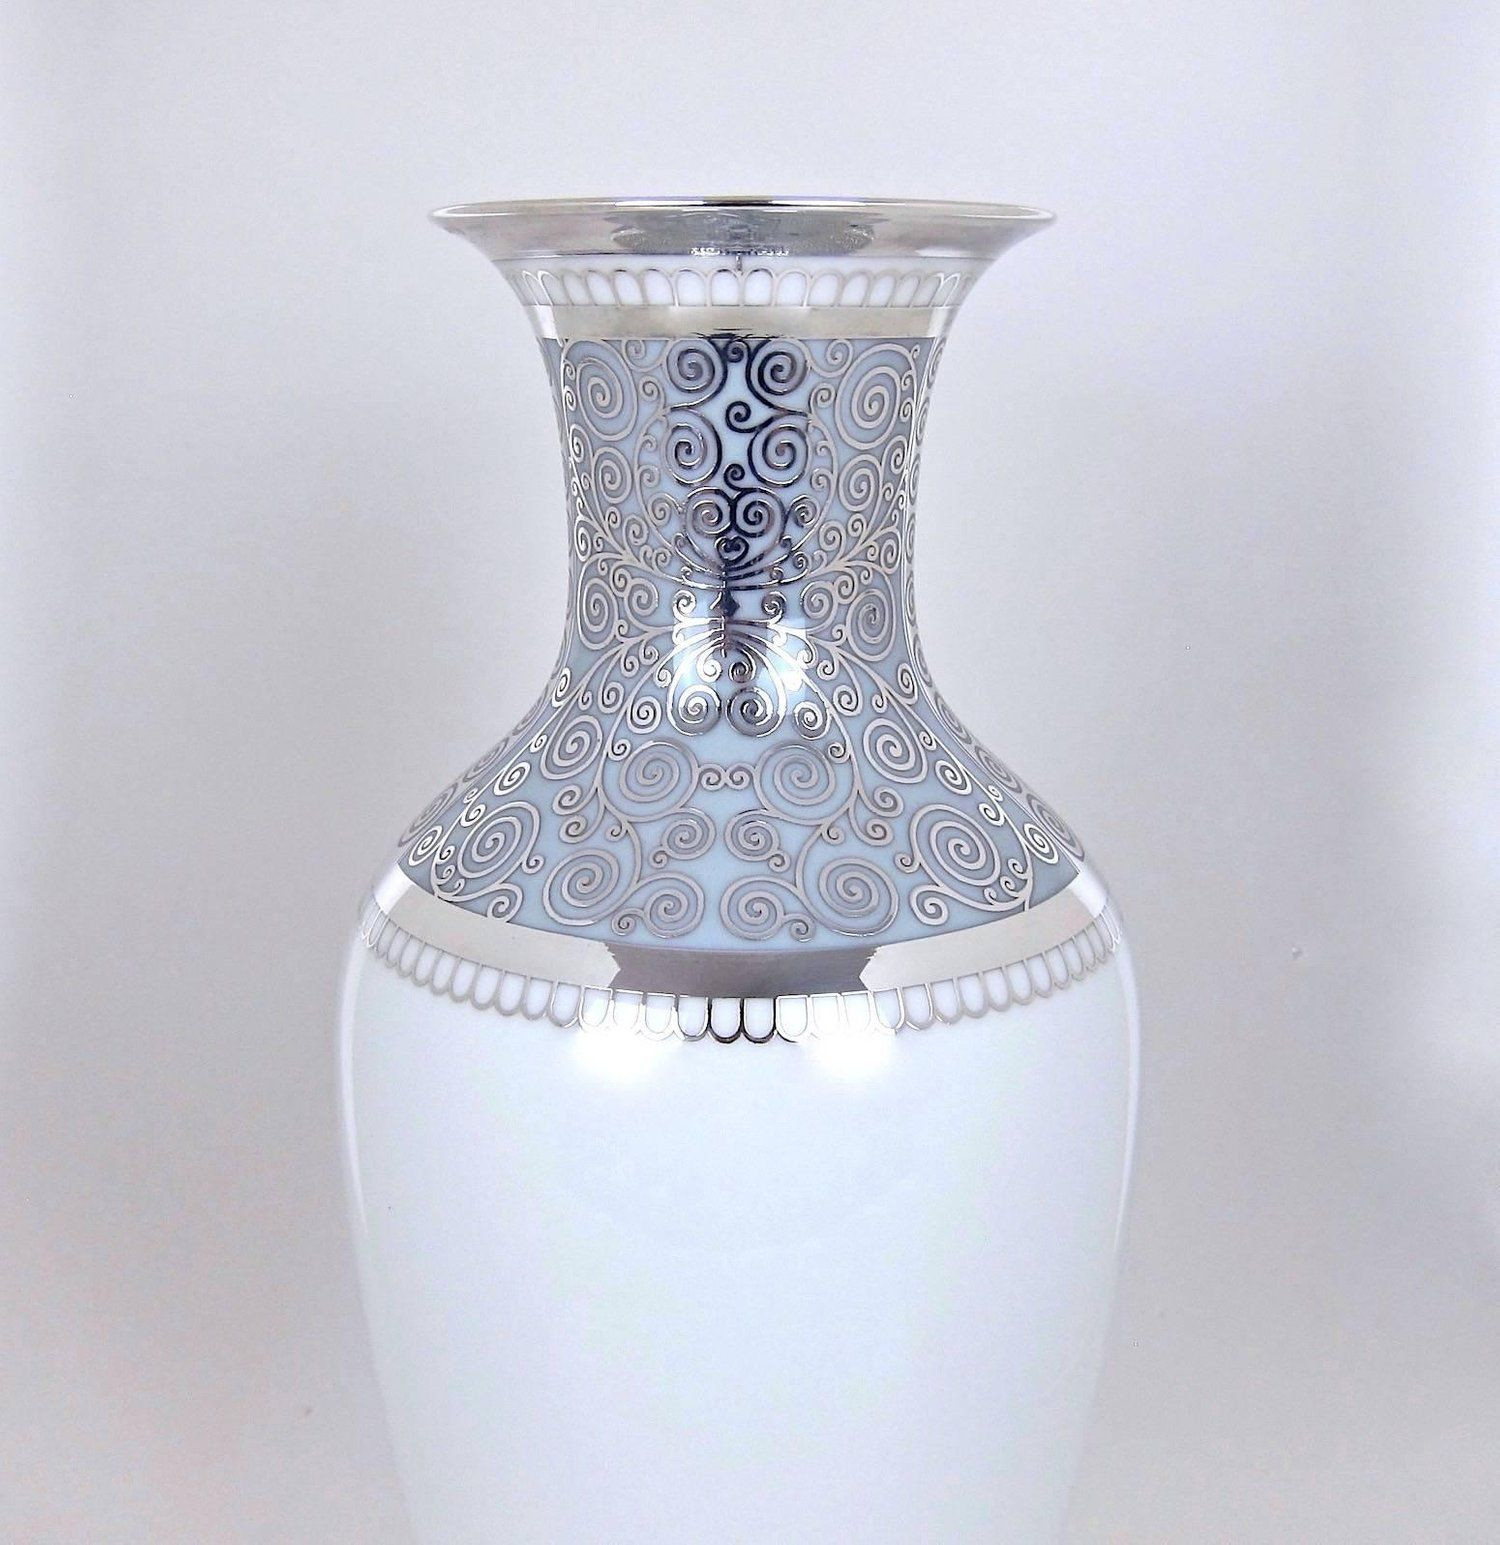 19 Stylish Tall Chinese Vases for Sale 2024 free download tall chinese vases for sale of 18 mid century glass vase the weekly world with regard to 18 mid century glass vase